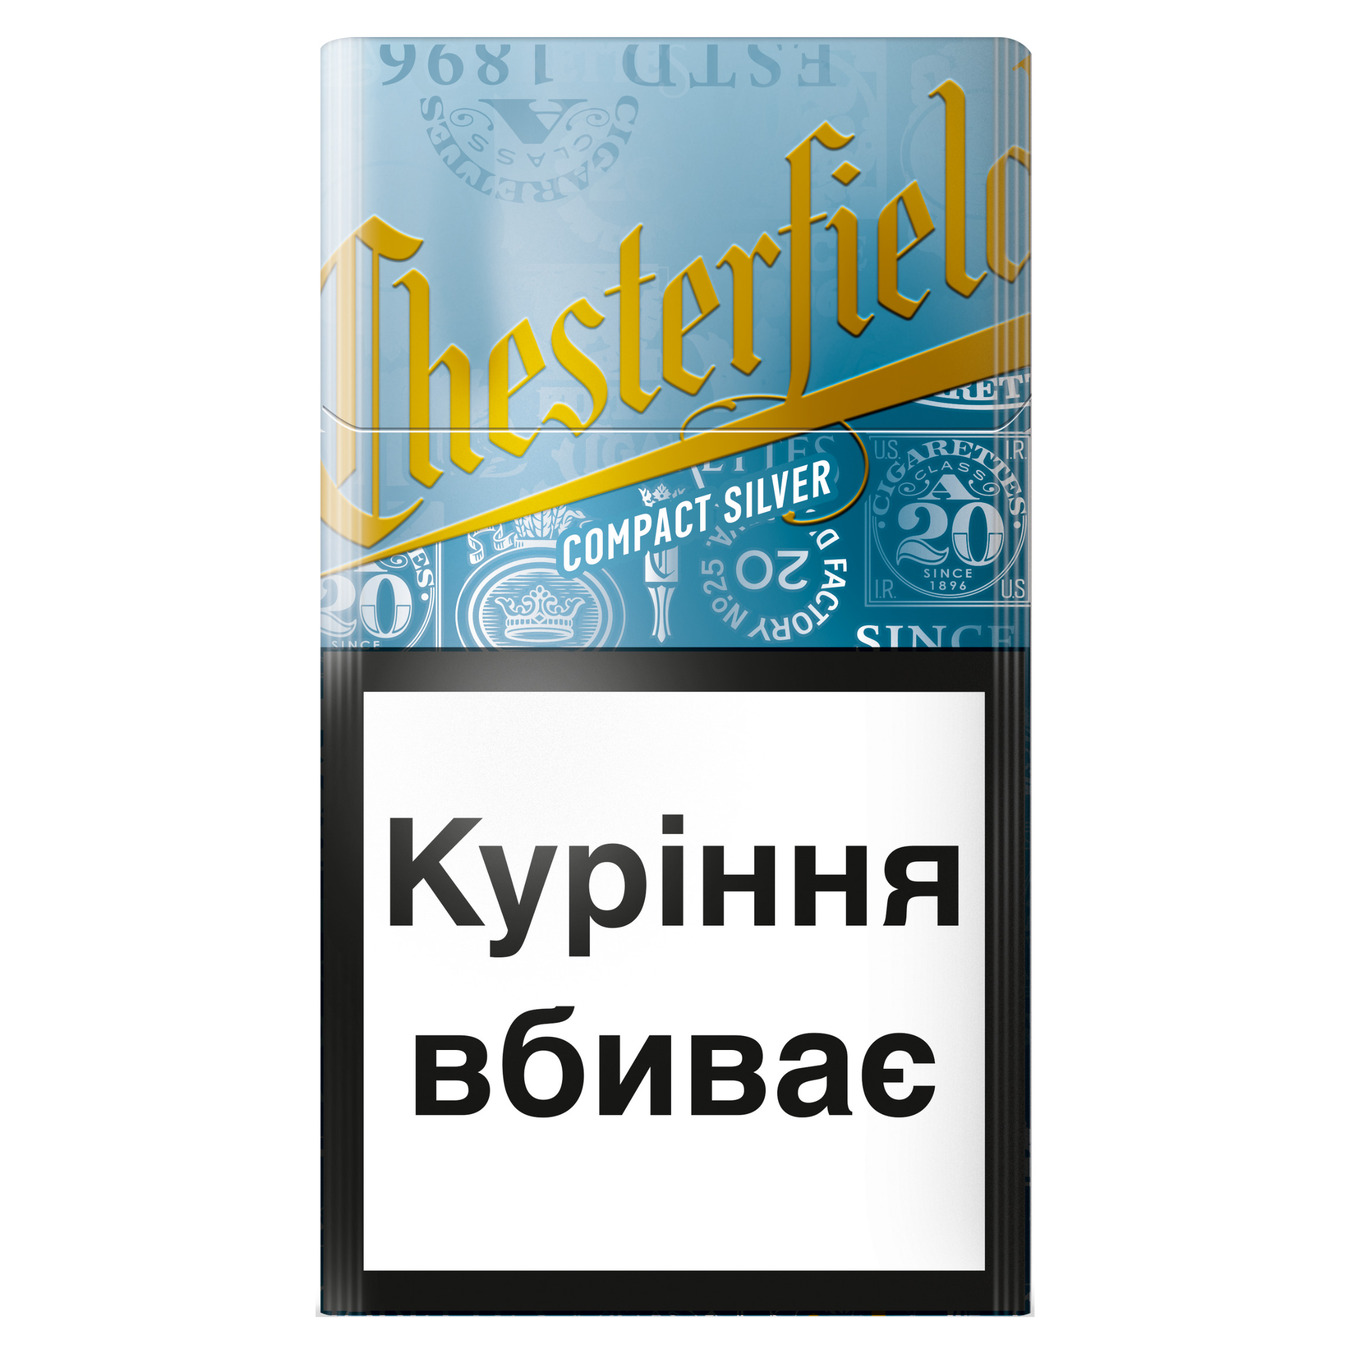 Cigarettes Chesterfield Compact Silver 20pcs (the price is indicated without excise tax)